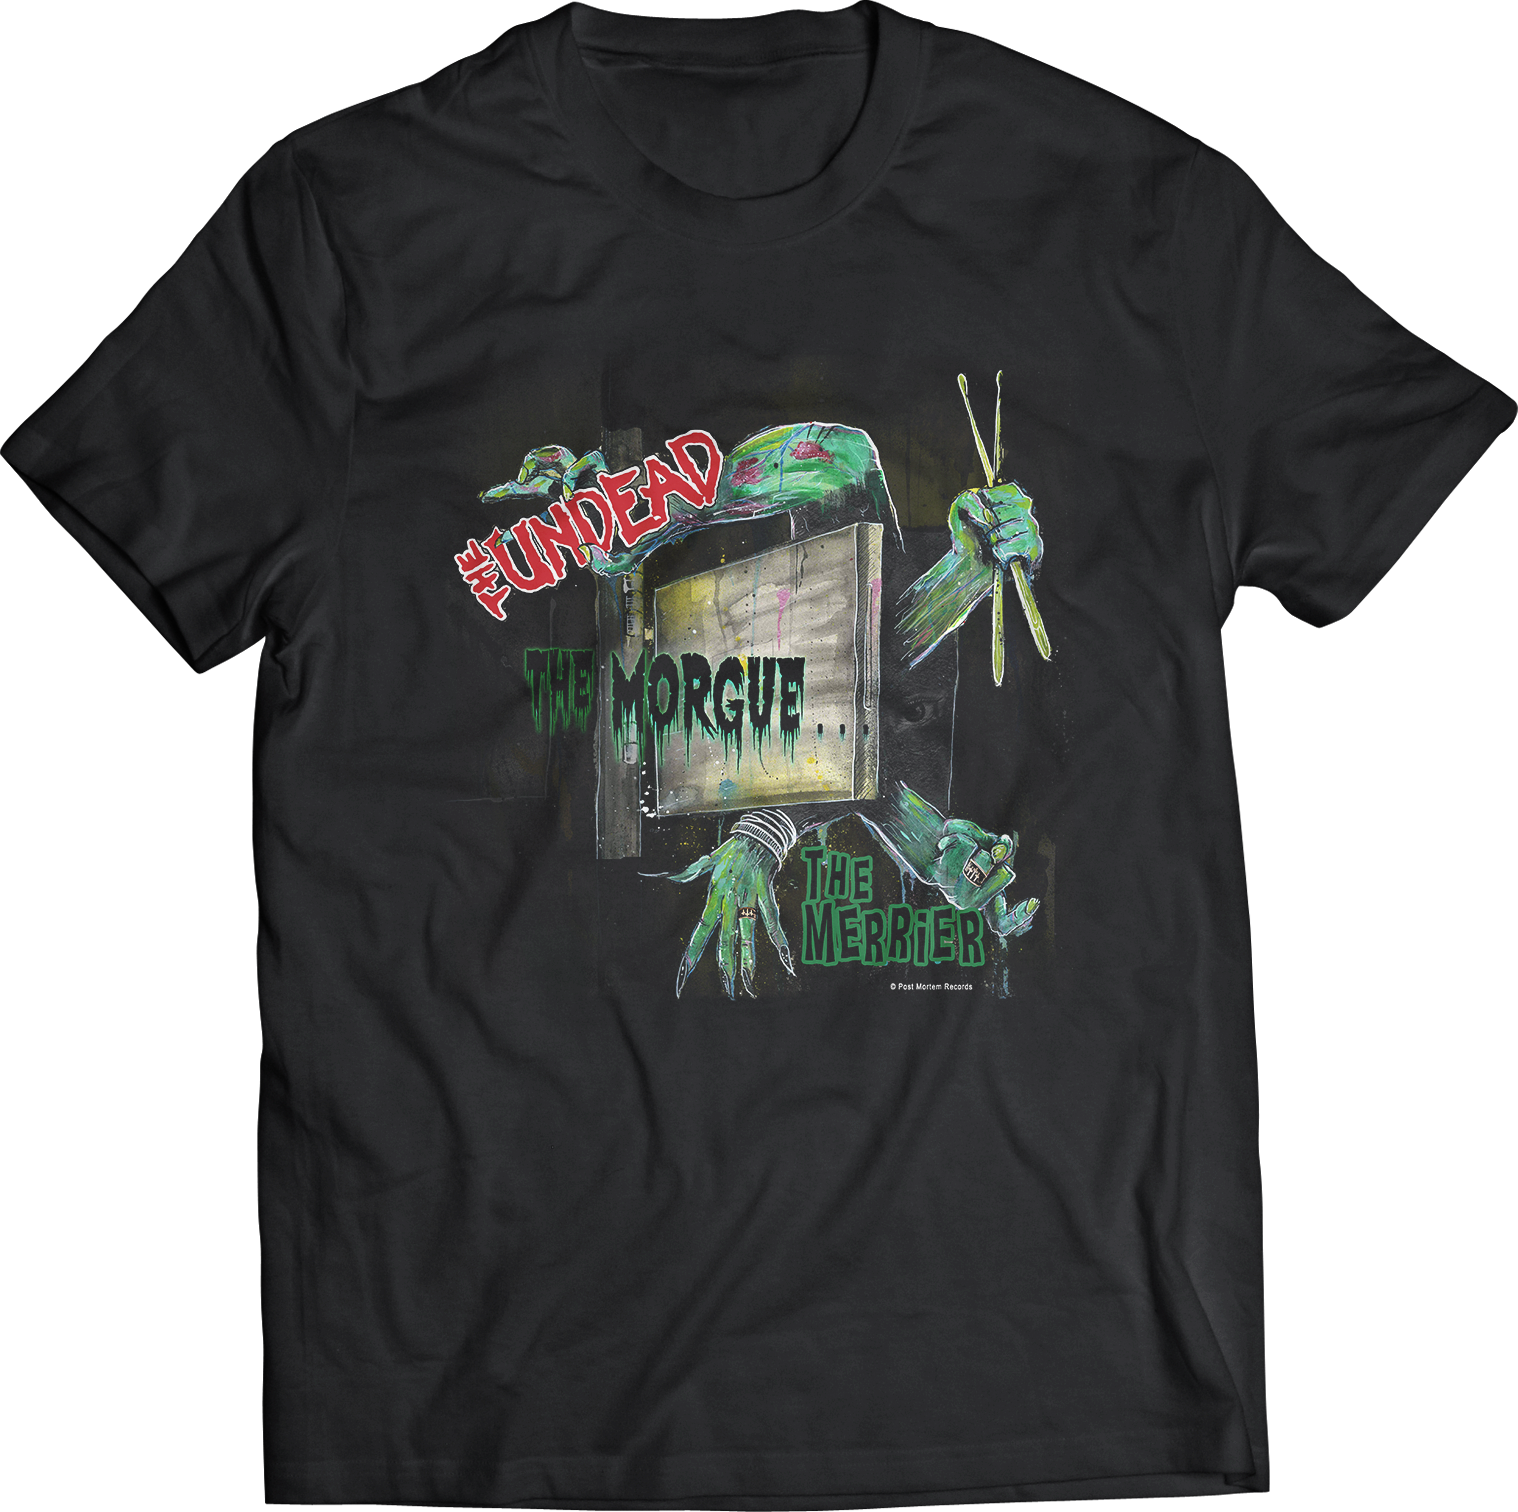 THE UNDEAD "THE MORGUE THE MERRIER" T-SHIRT